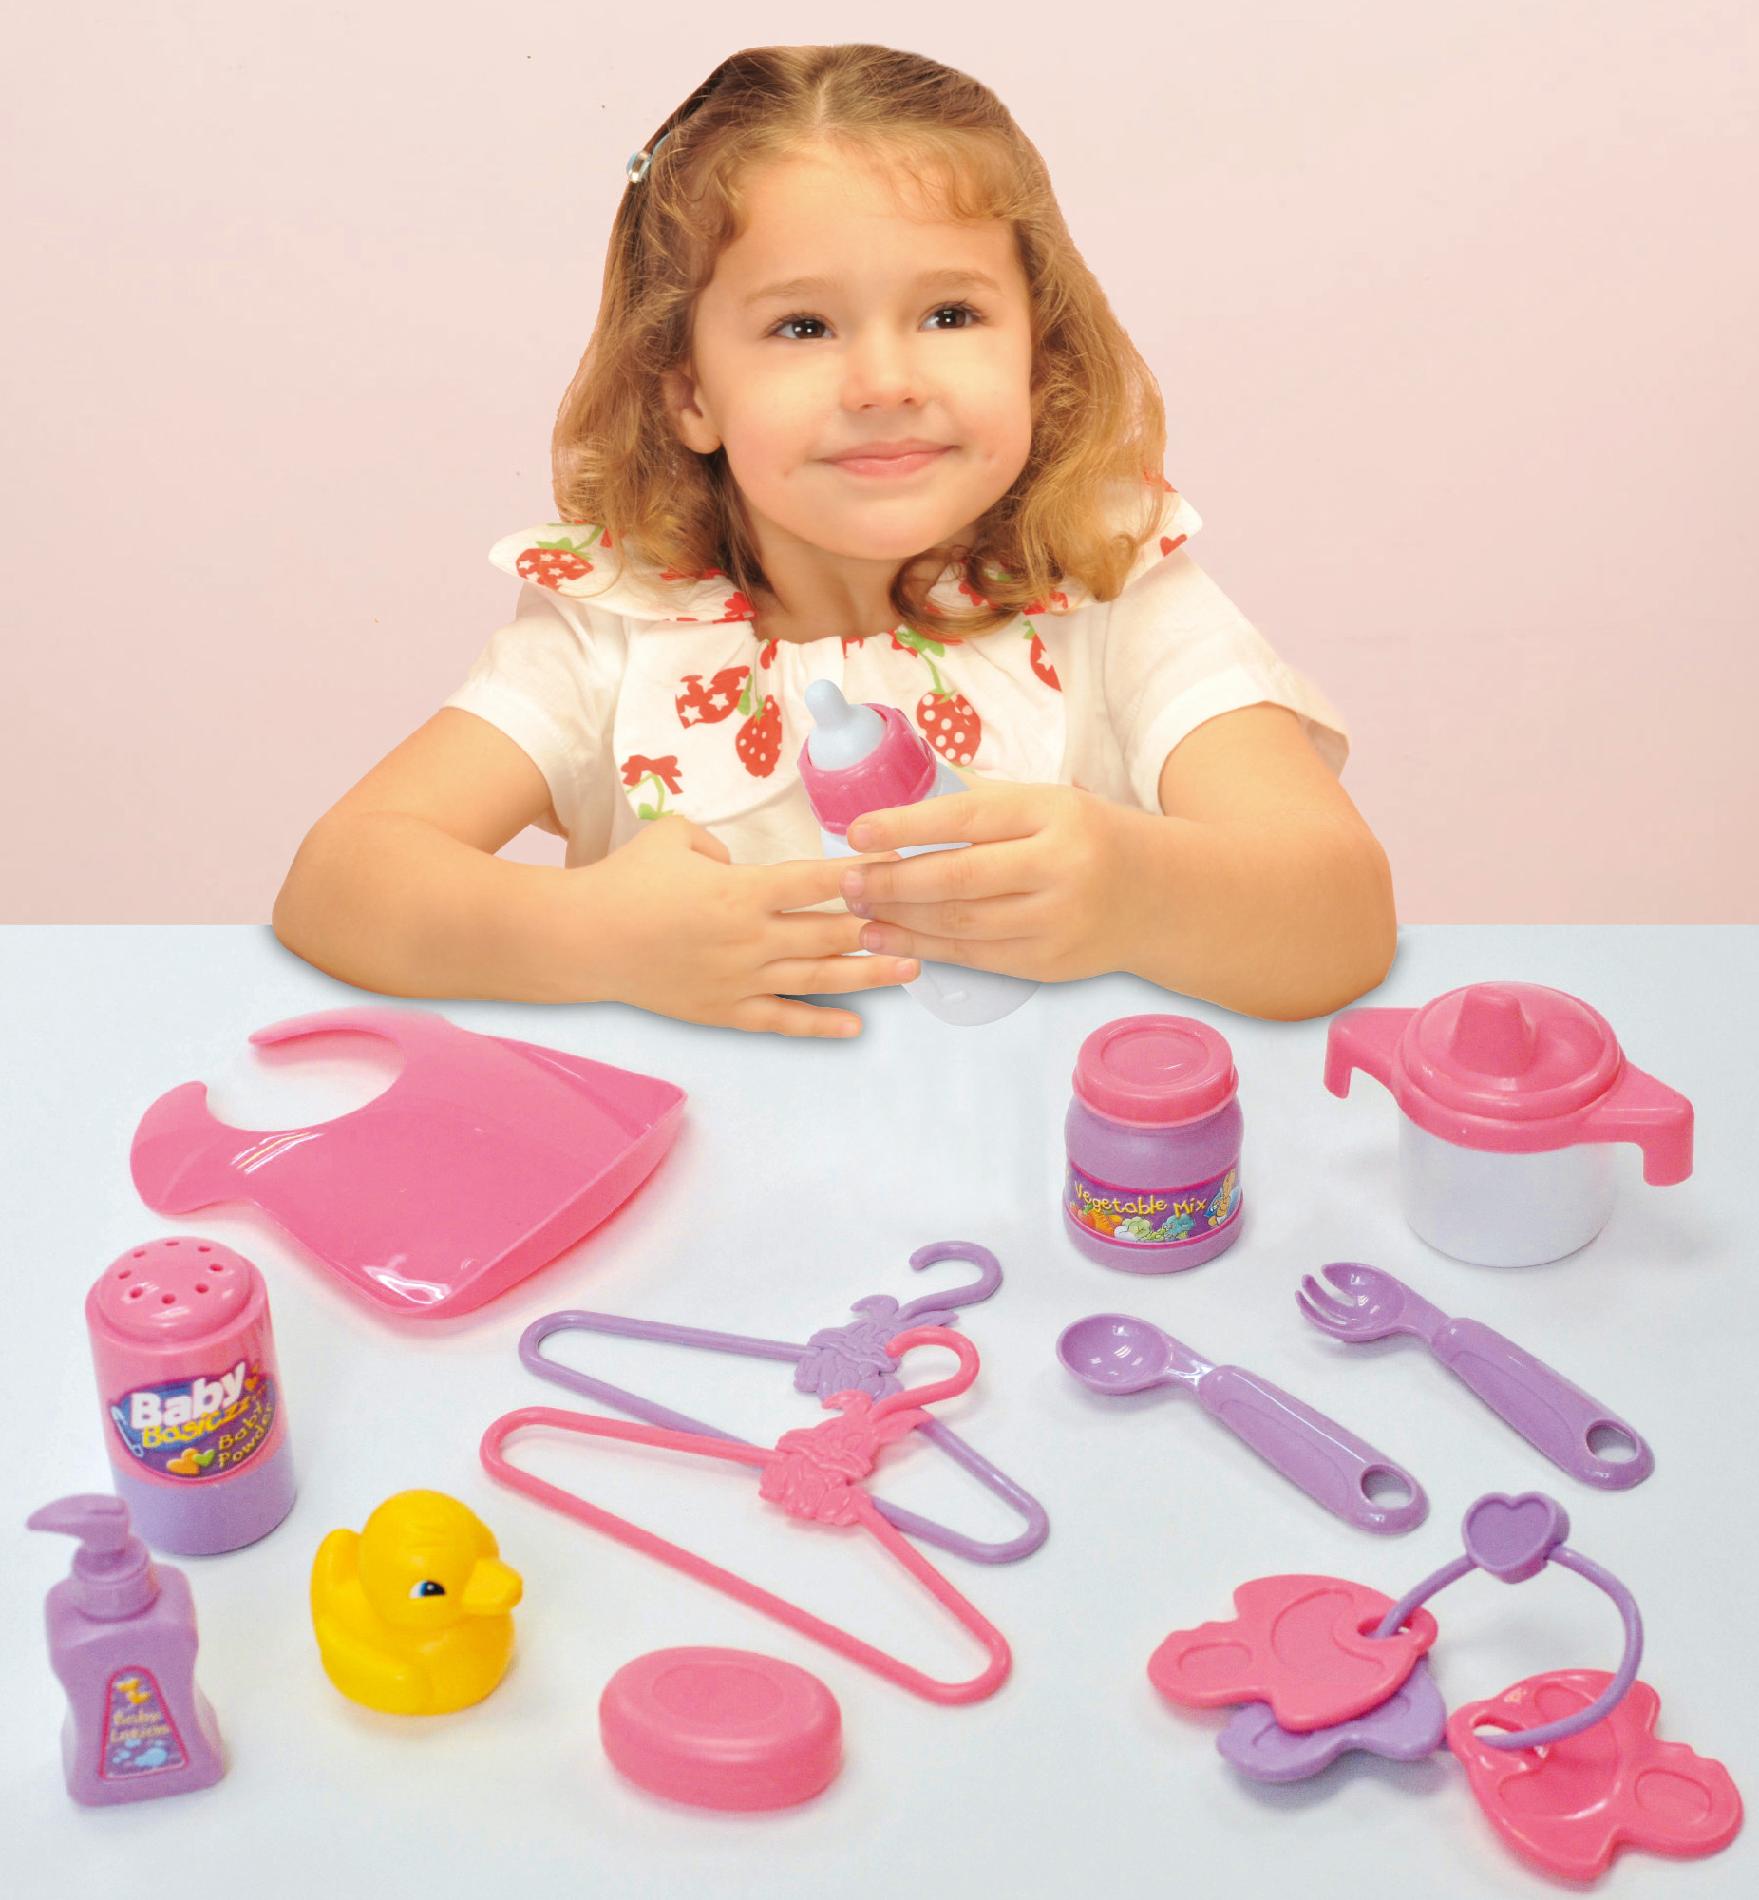 Baby Basics Baby Doll Accessories Bag—$2.99